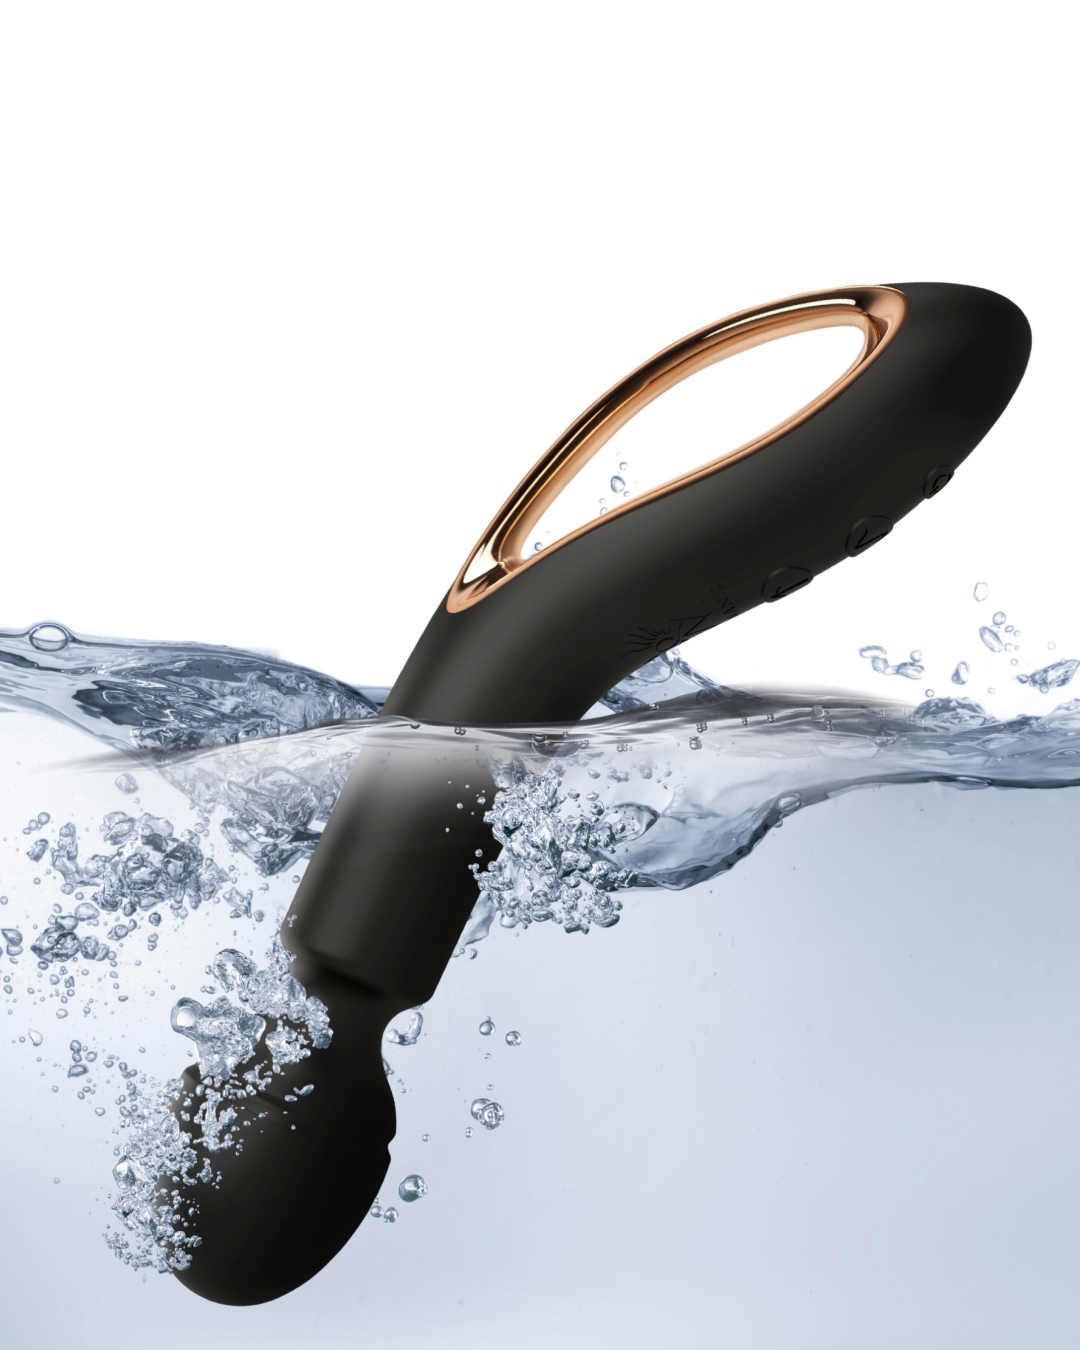 Copy of O Wand II Cordless Vibrator - Black  wand with gold trim submerged in water 